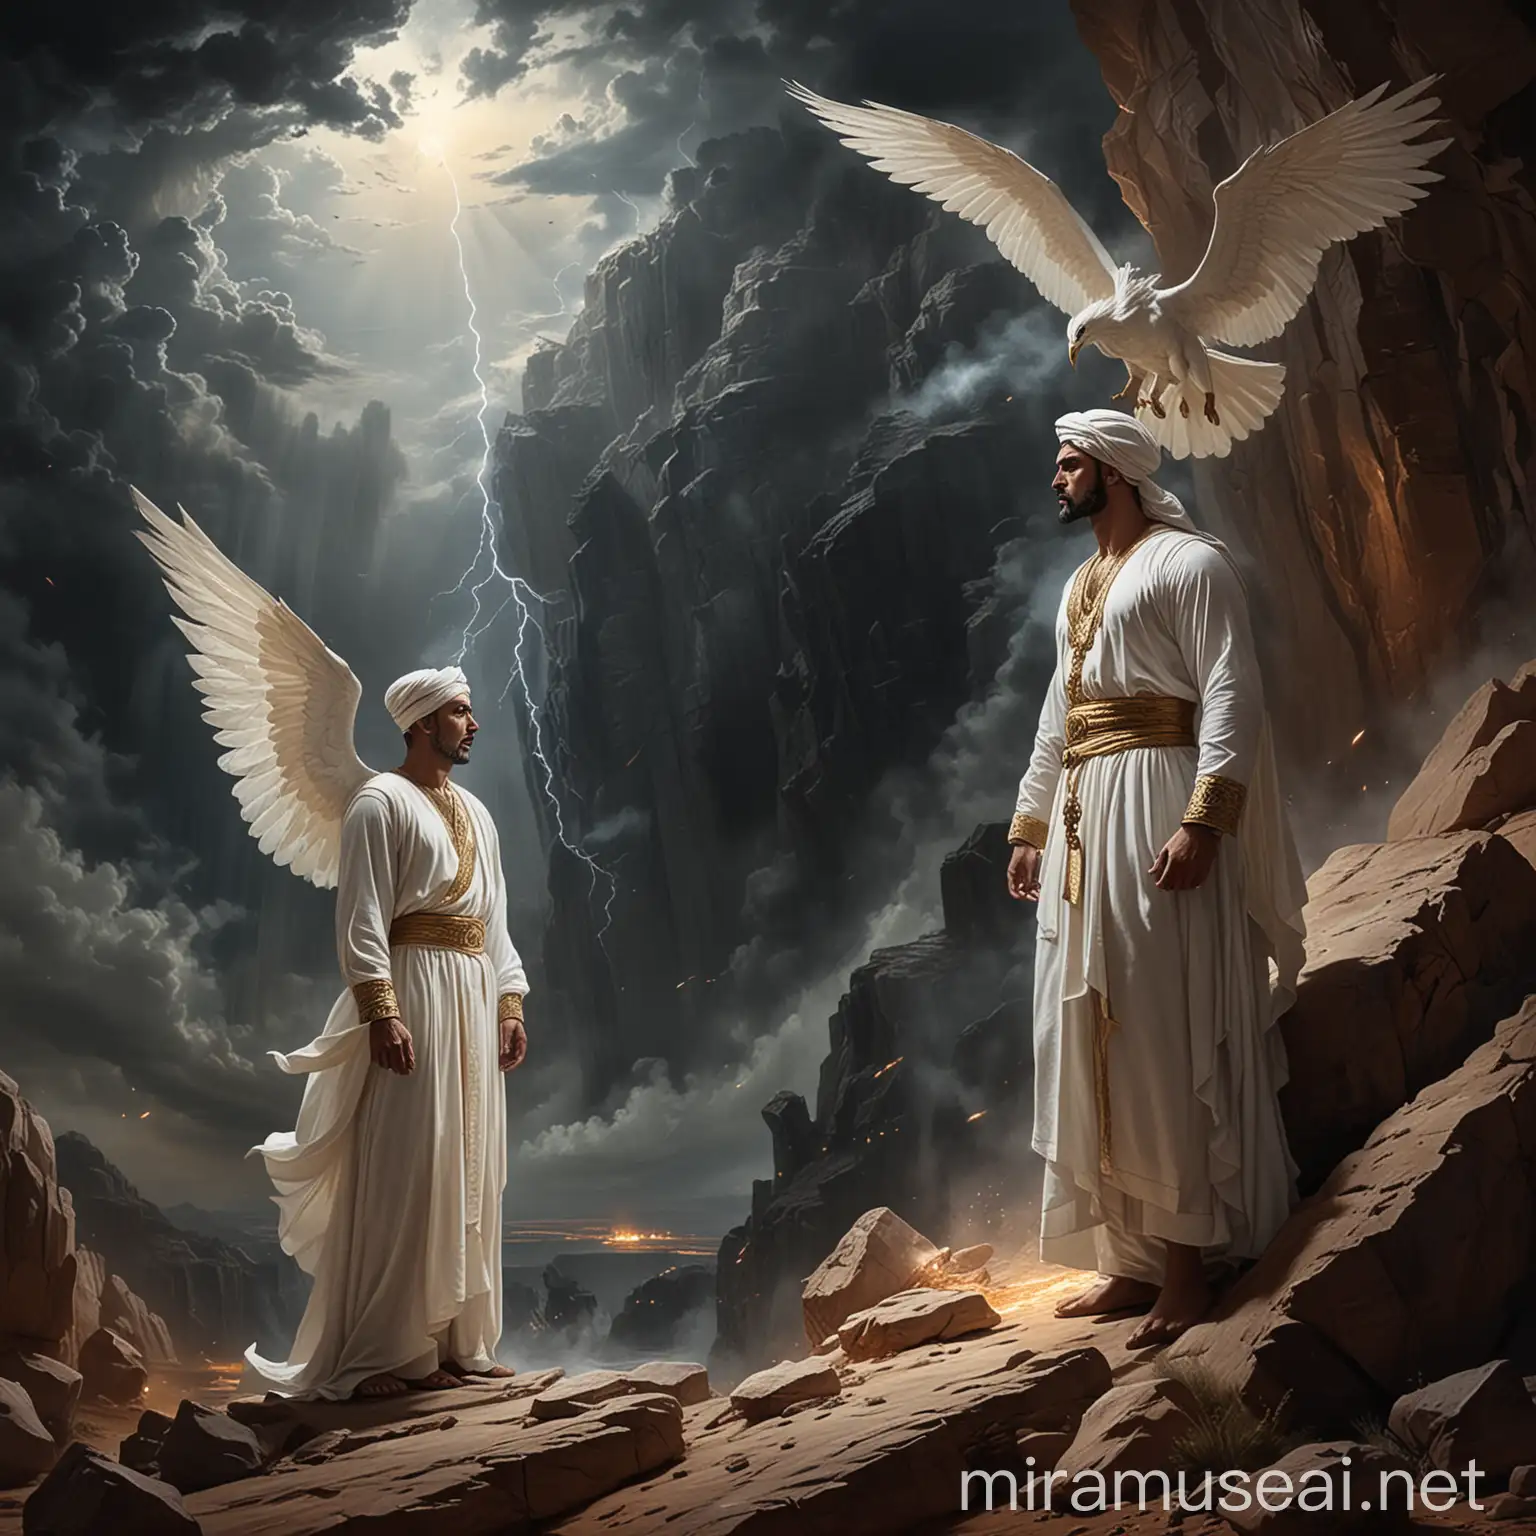 This picture depicts a dramatic and intense scene with the two main male characters. The figure in front appears to be a smaller man, wearing an Arabian turban and a long white Arabian gown, styled like a painting, and standing on a rock, looking up at a huge winged giant figure. The larger figure looks like an angel or god, with wings. which emits light. A powerful flash of energy or lightning connects the two figures. The dark and cloudy sky adds intensity to the scene. Fire and smoke rise from below, indicating destruction or conflict.